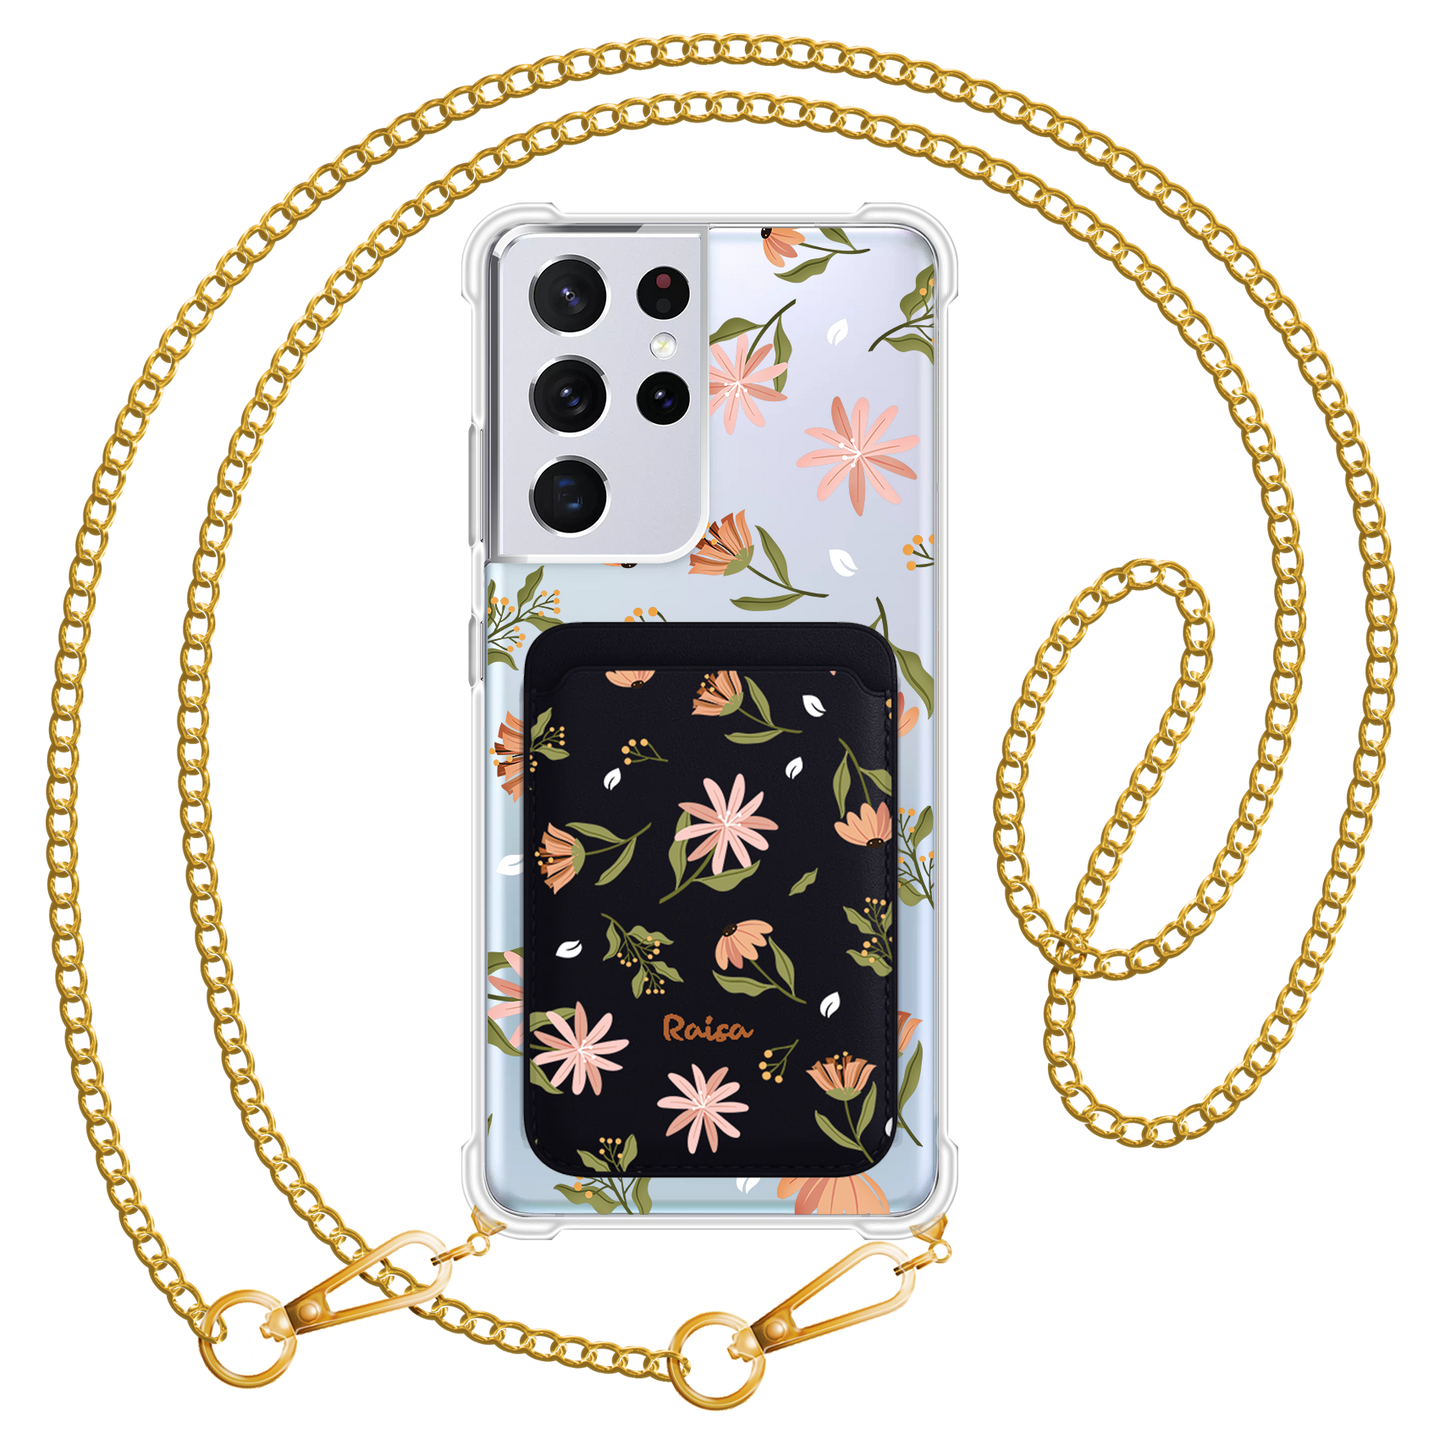 Android Magnetic Wallet Case - Cosmos Flower